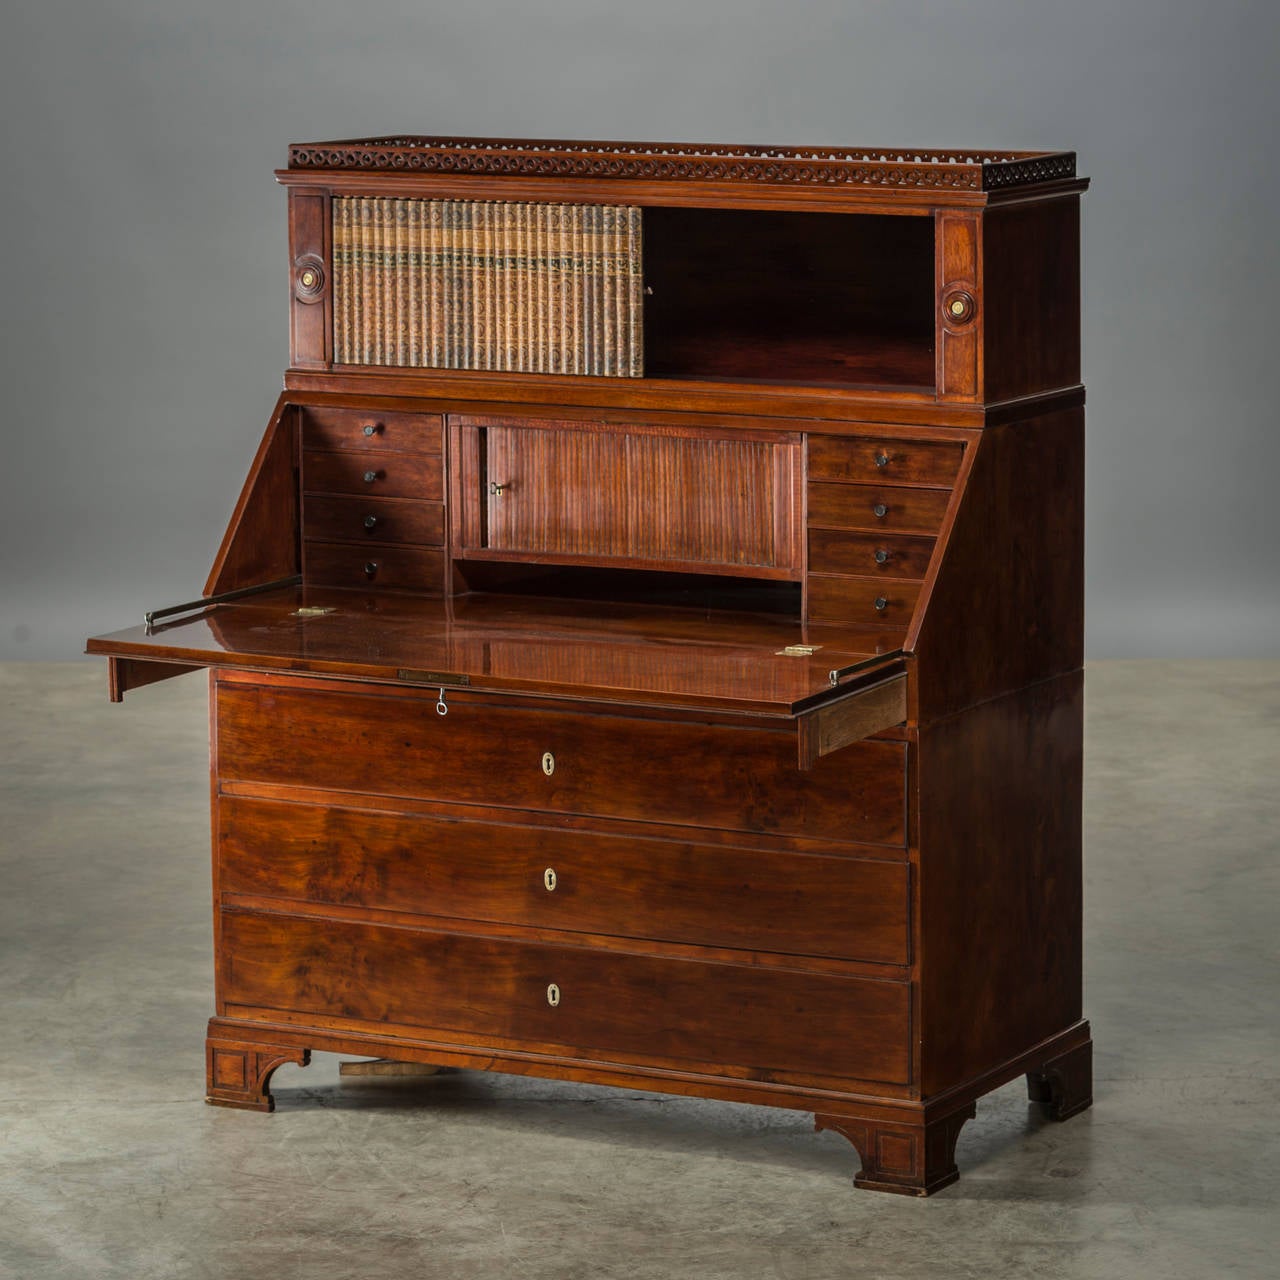 Elegant Louis XVI bureau in mahogany Copenhagen, 1780.
Behind the writing flap small drawers and a tambour door. Loose top cabinet with original tambour door in the form of imitated books with leather back.
Presumably by J.C. Lillie ( 1760 - 1827 )